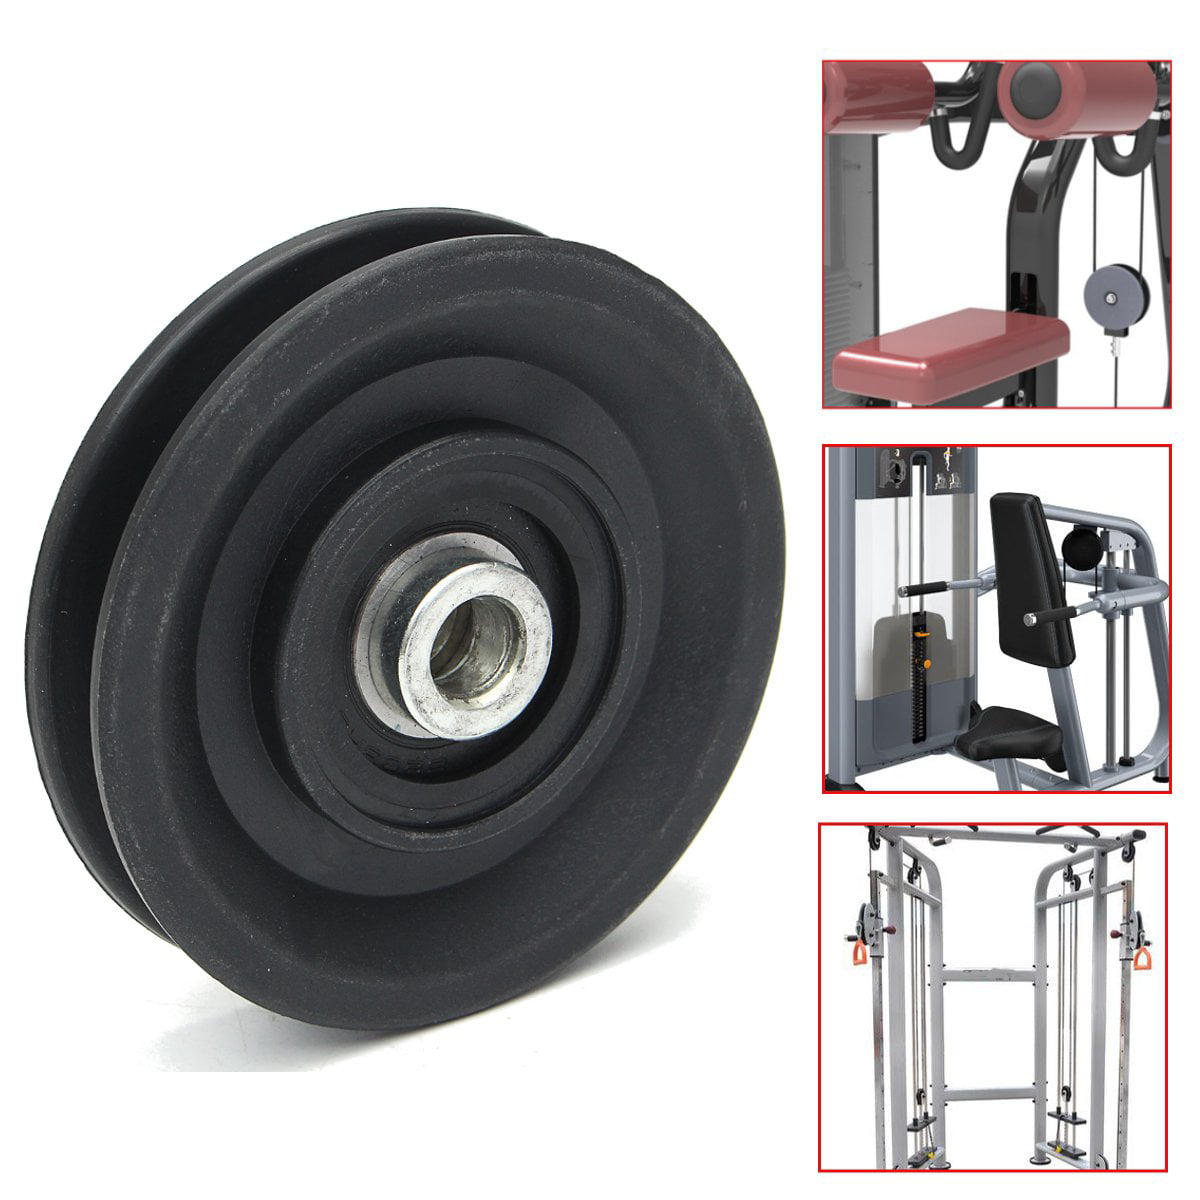 90mm Gym Pulley Replacement w/Bearings Pully Cable Machine  Home Fitness Workout 